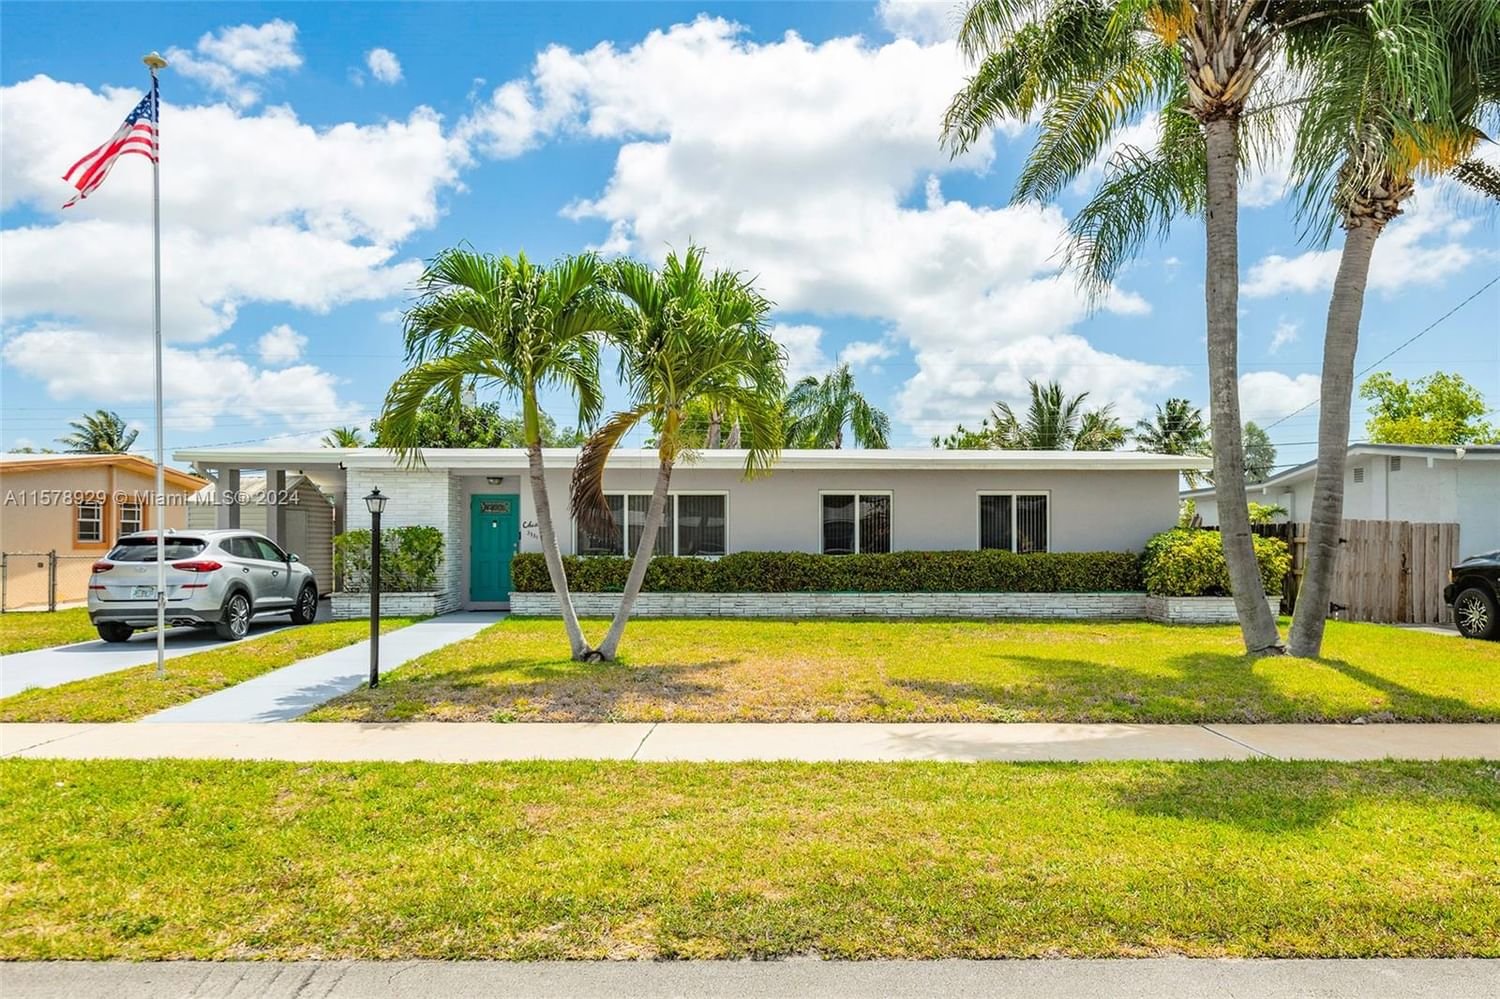 Real estate property located at 3331 105th Ave, Miami-Dade County, LEE MANOR 2ND ADDN, Miami, FL